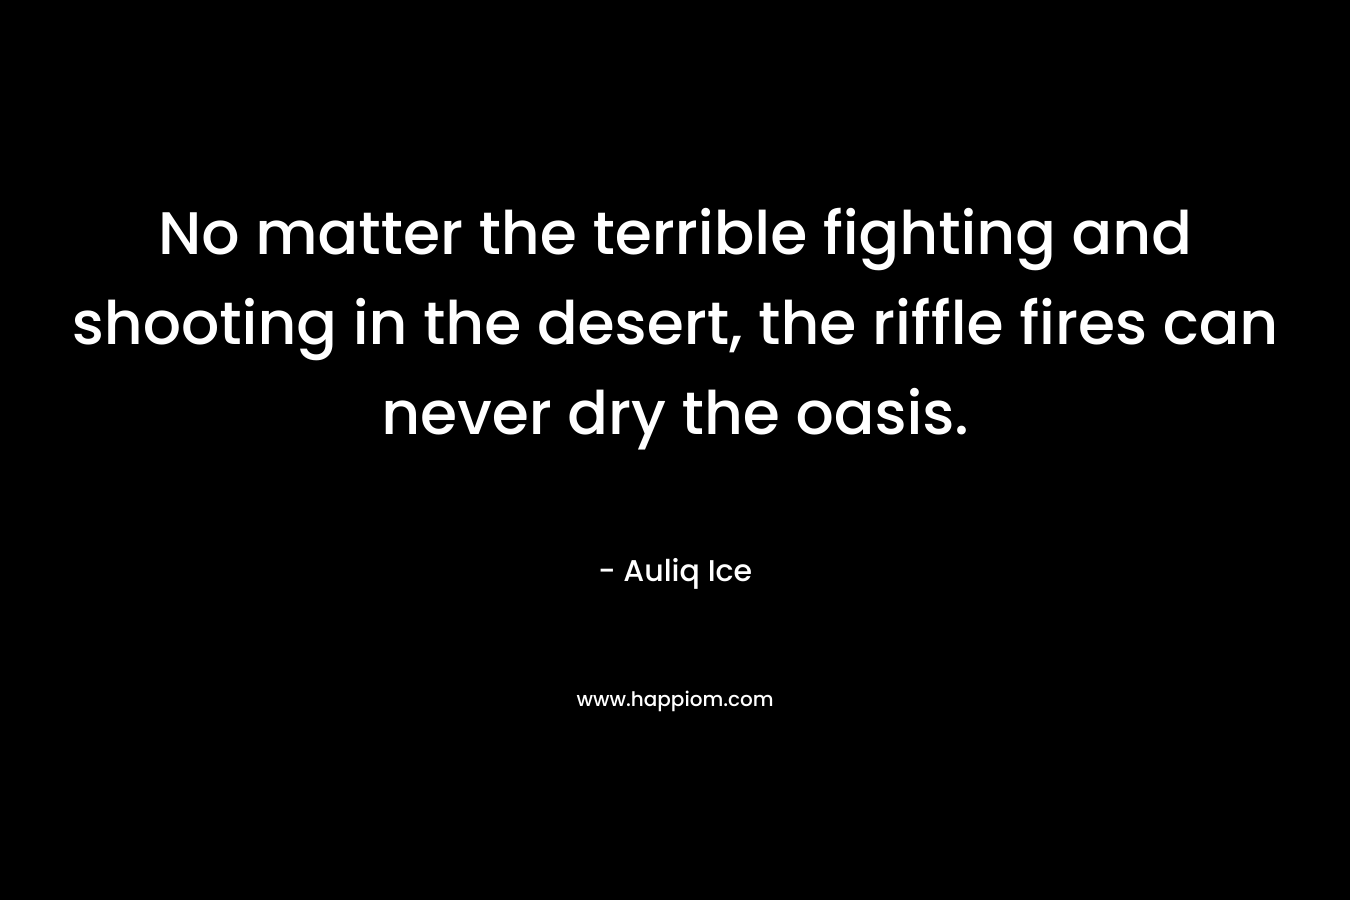 No matter the terrible fighting and shooting in the desert, the riffle fires can never dry the oasis. – Auliq Ice